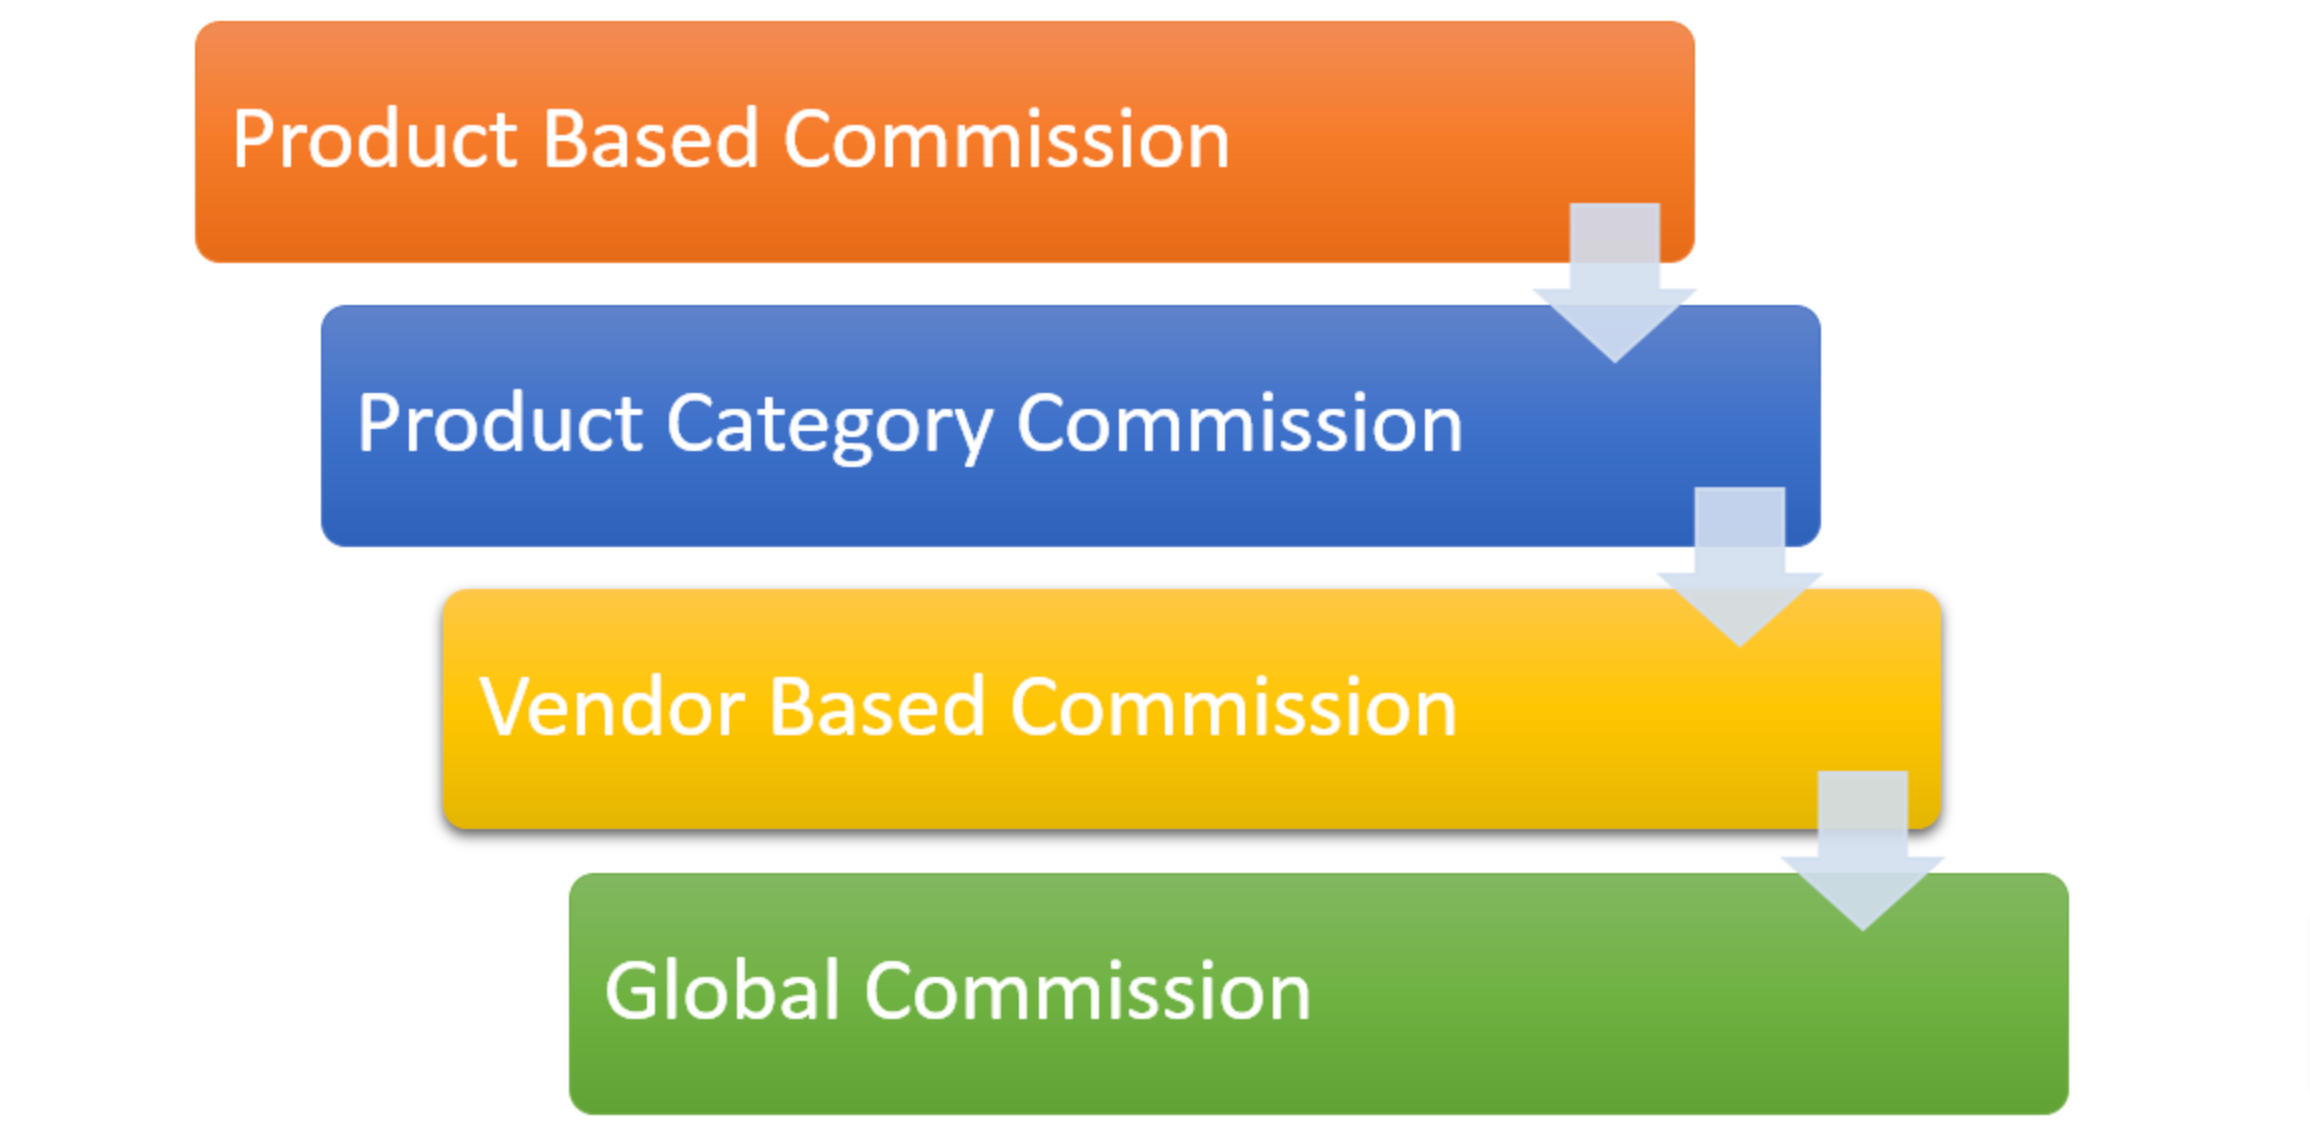 This is an image that shows multiple commission in a marketplace